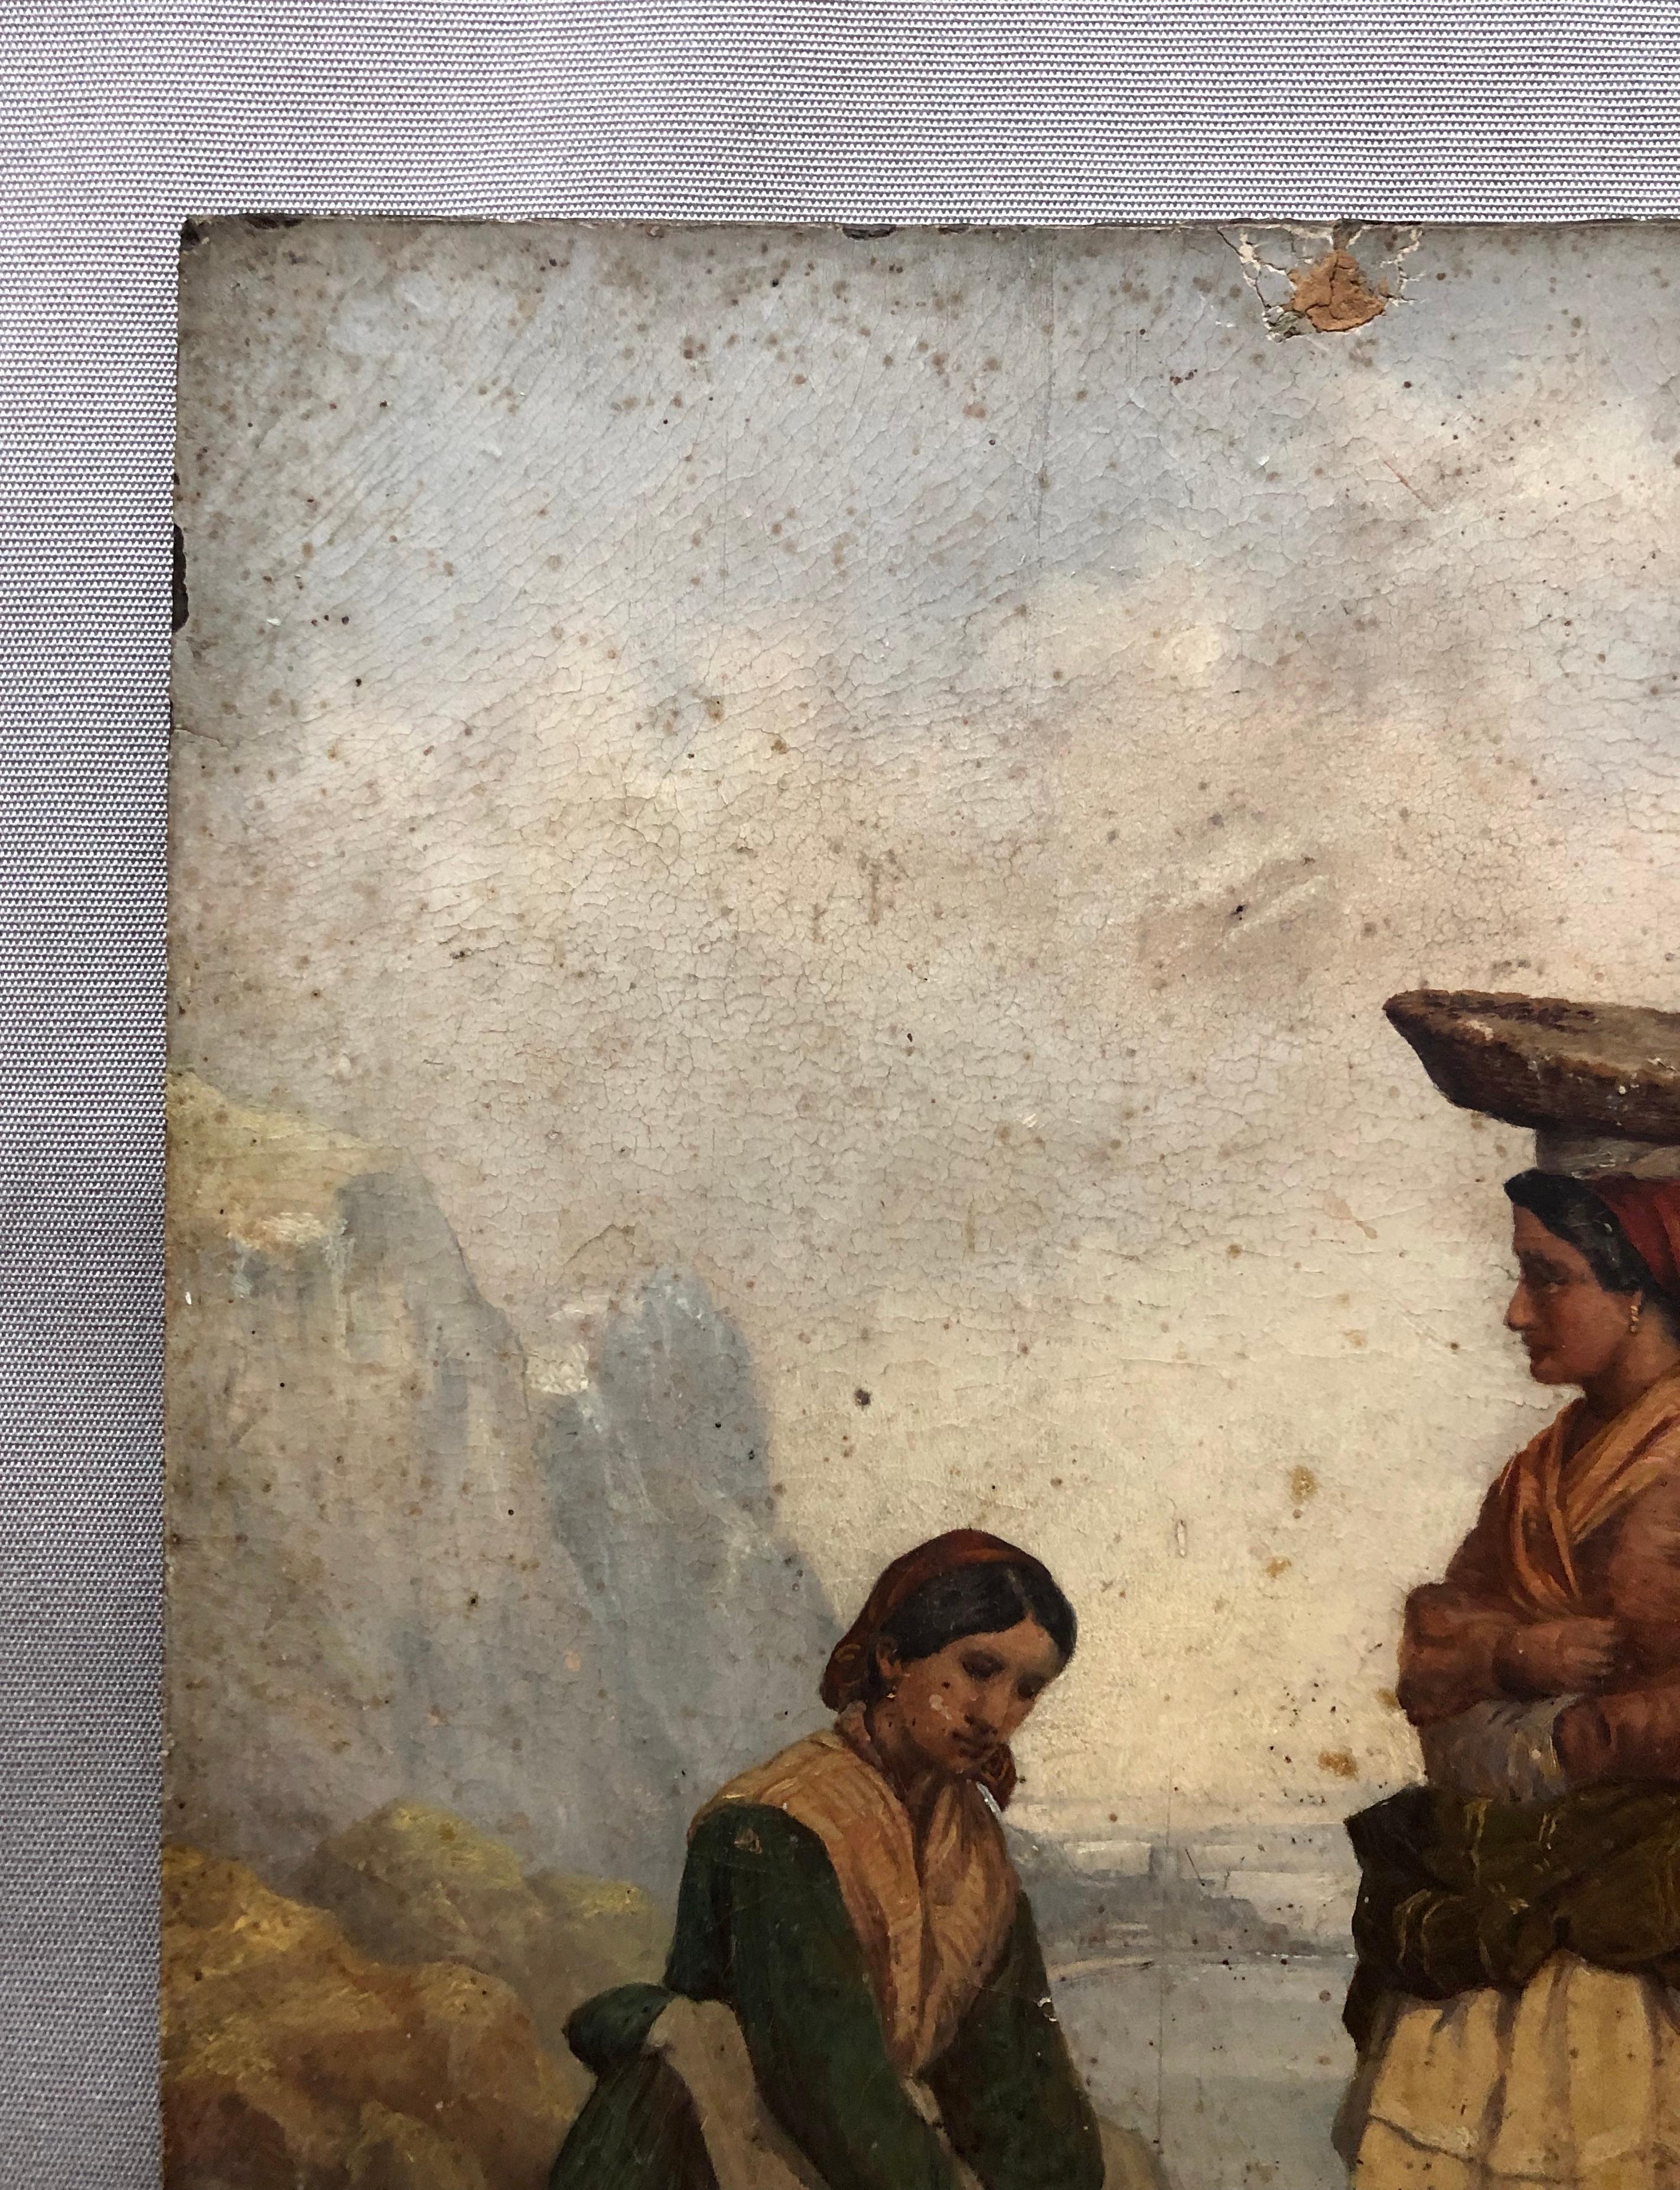 Fisherwomen on foot.
Oil on hard cardboard signed L. Bertrand, dated 1866.
An accident at the top center of the cardboard.
A small hole at the bottom center.
Slightly trimmed corners.
Small cracks, small paint gaps, small dirt.
33 x 27 cm